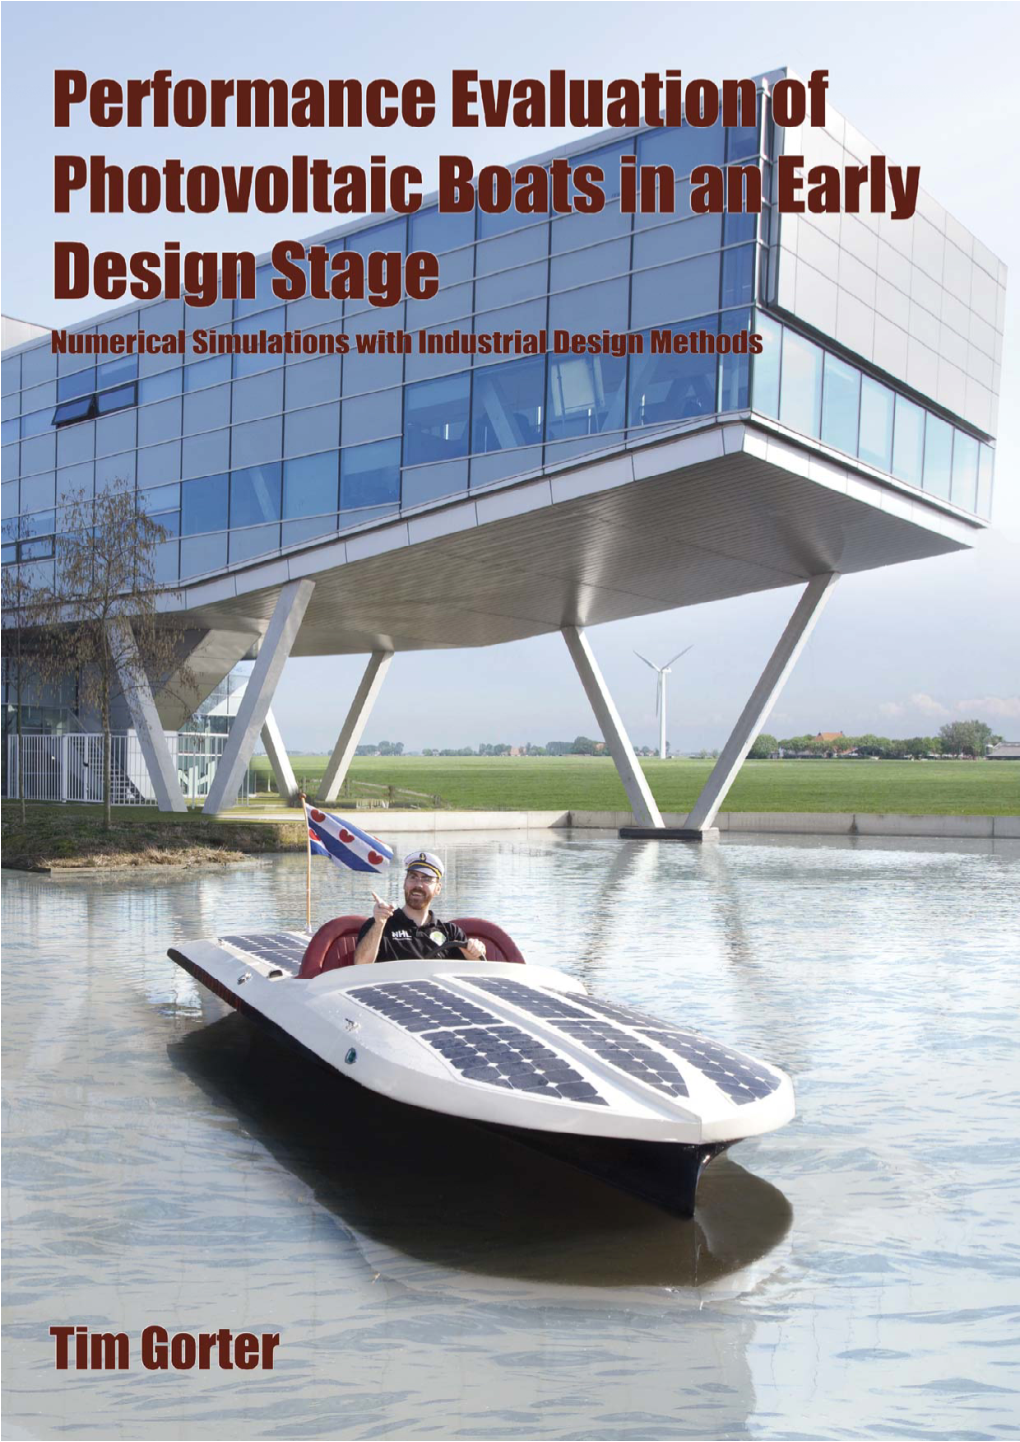 Performance Evaluation of Photovoltaic Boats in an Early Design Stage